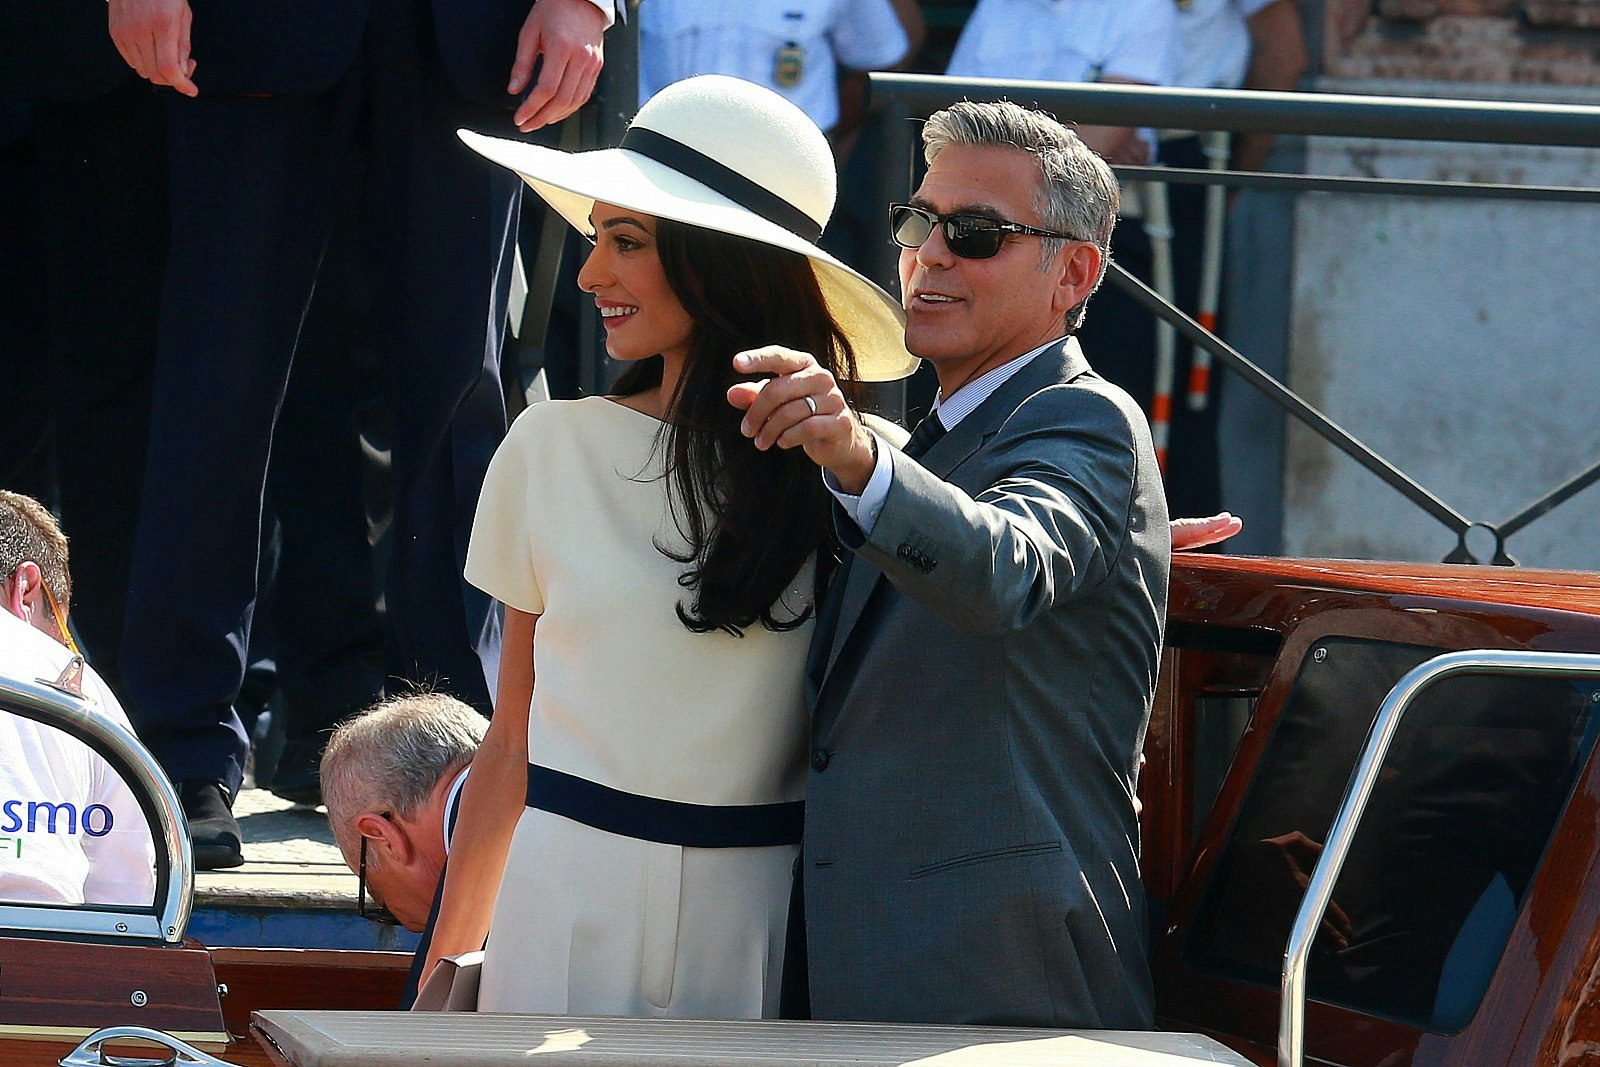 George and Amal Clooney arriving at their civil ceremony in Venice on a boat; she is wearing a cream trouser suit and wide-brimmed cream hat and he is wearing a dark grey suit. 